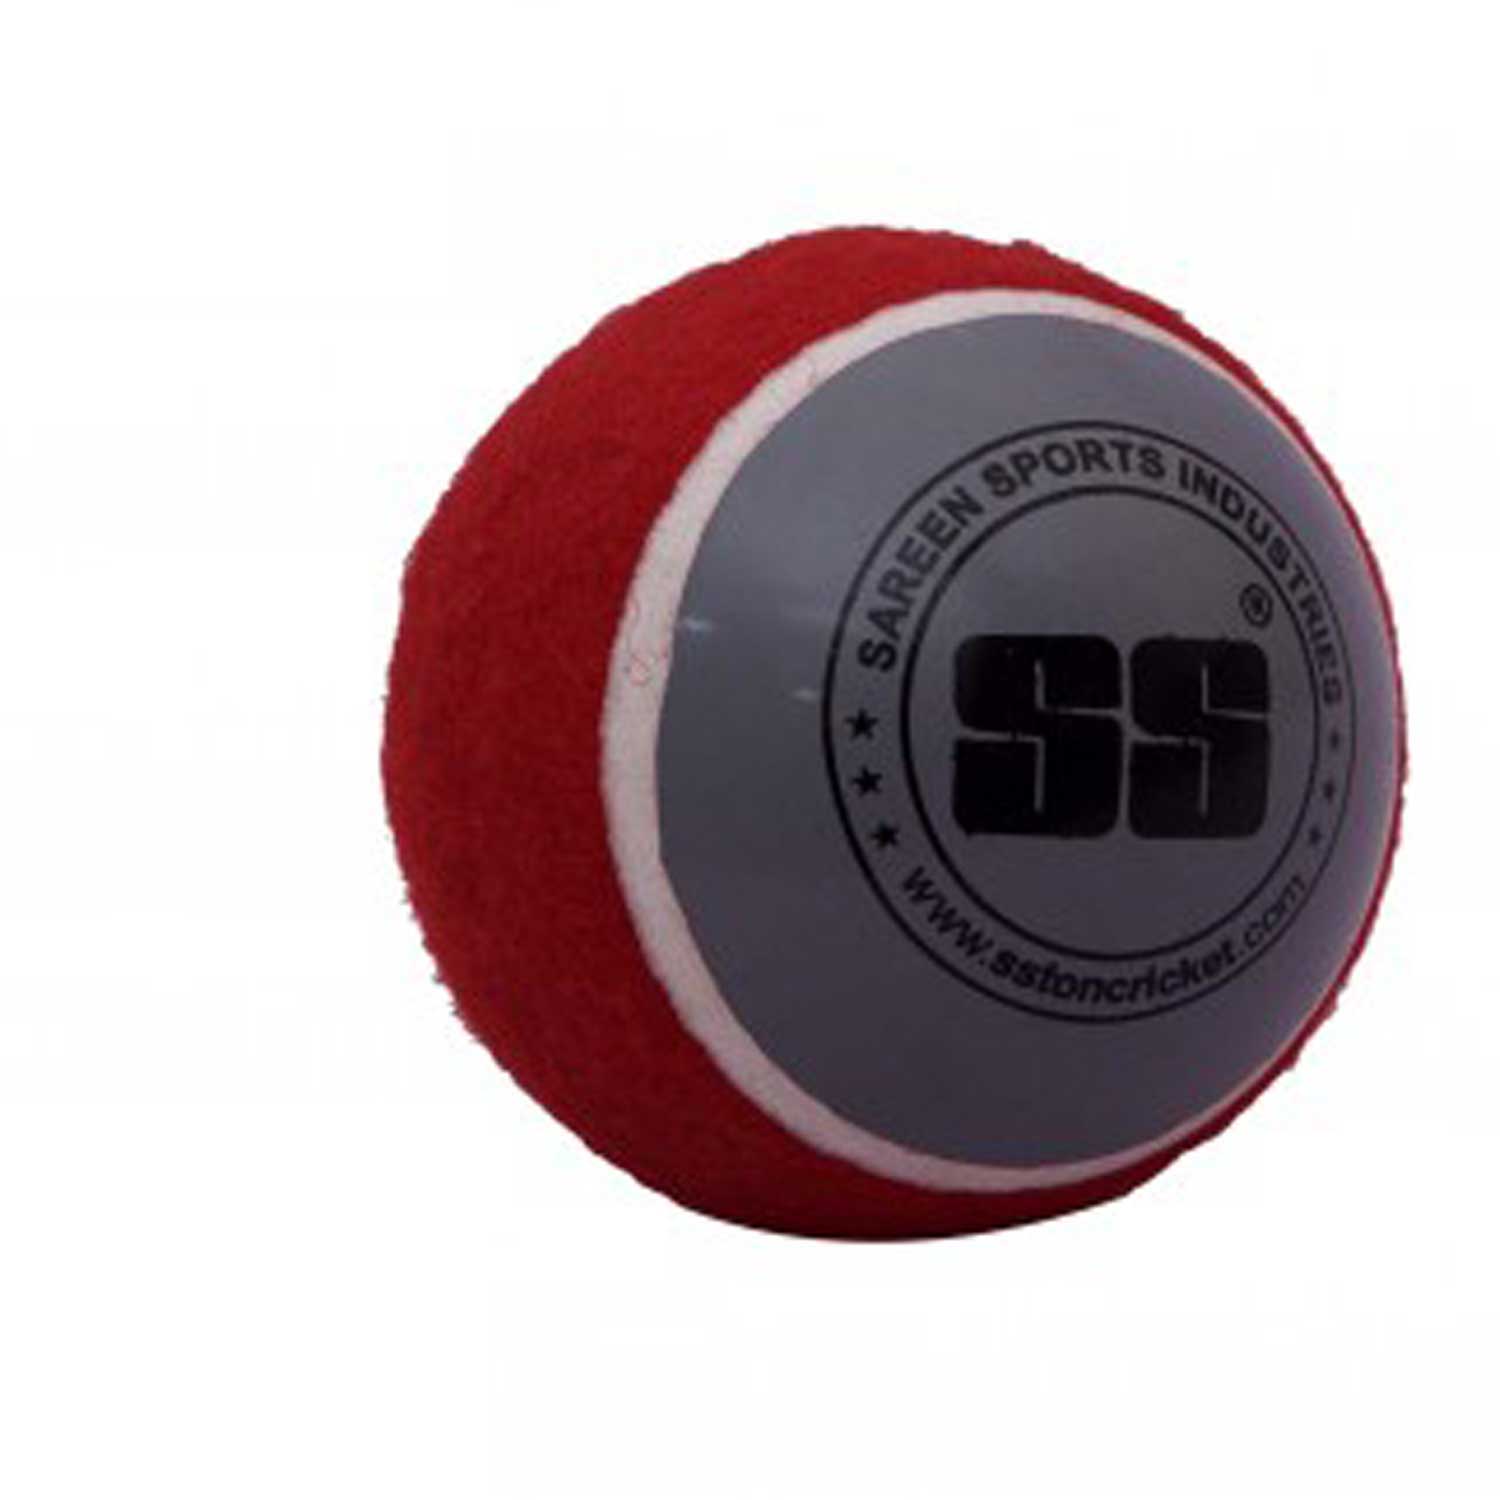 SS Swing Cricket Ball with Seam